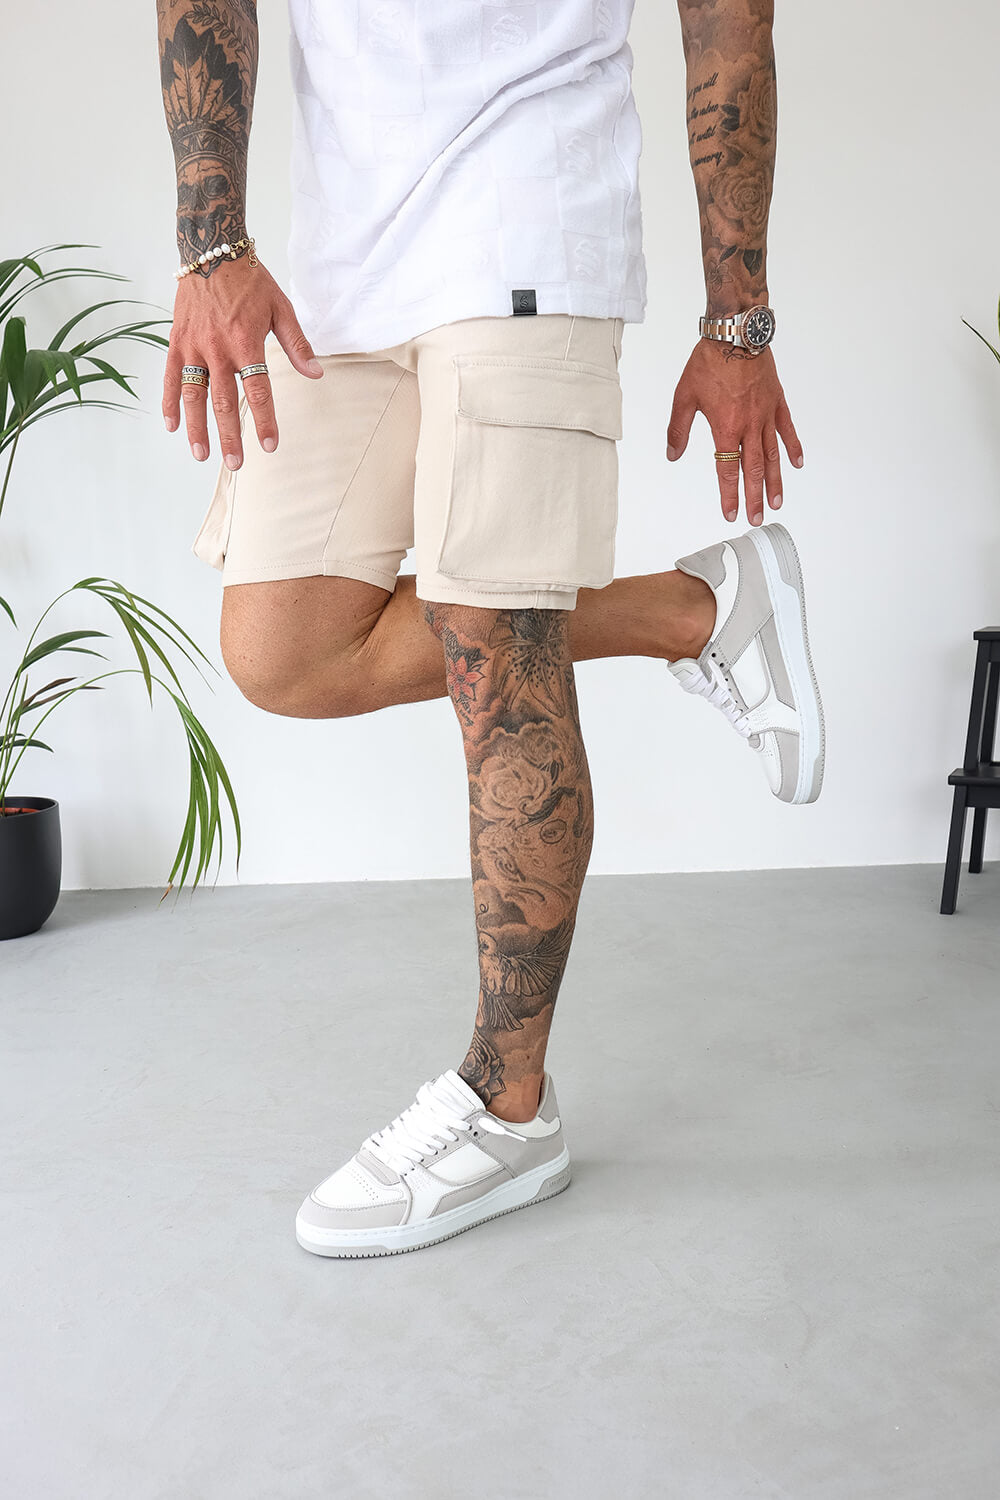 Black Denim Shorts with White Socks Outfits For Men (14 ideas & outfits) |  Lookastic